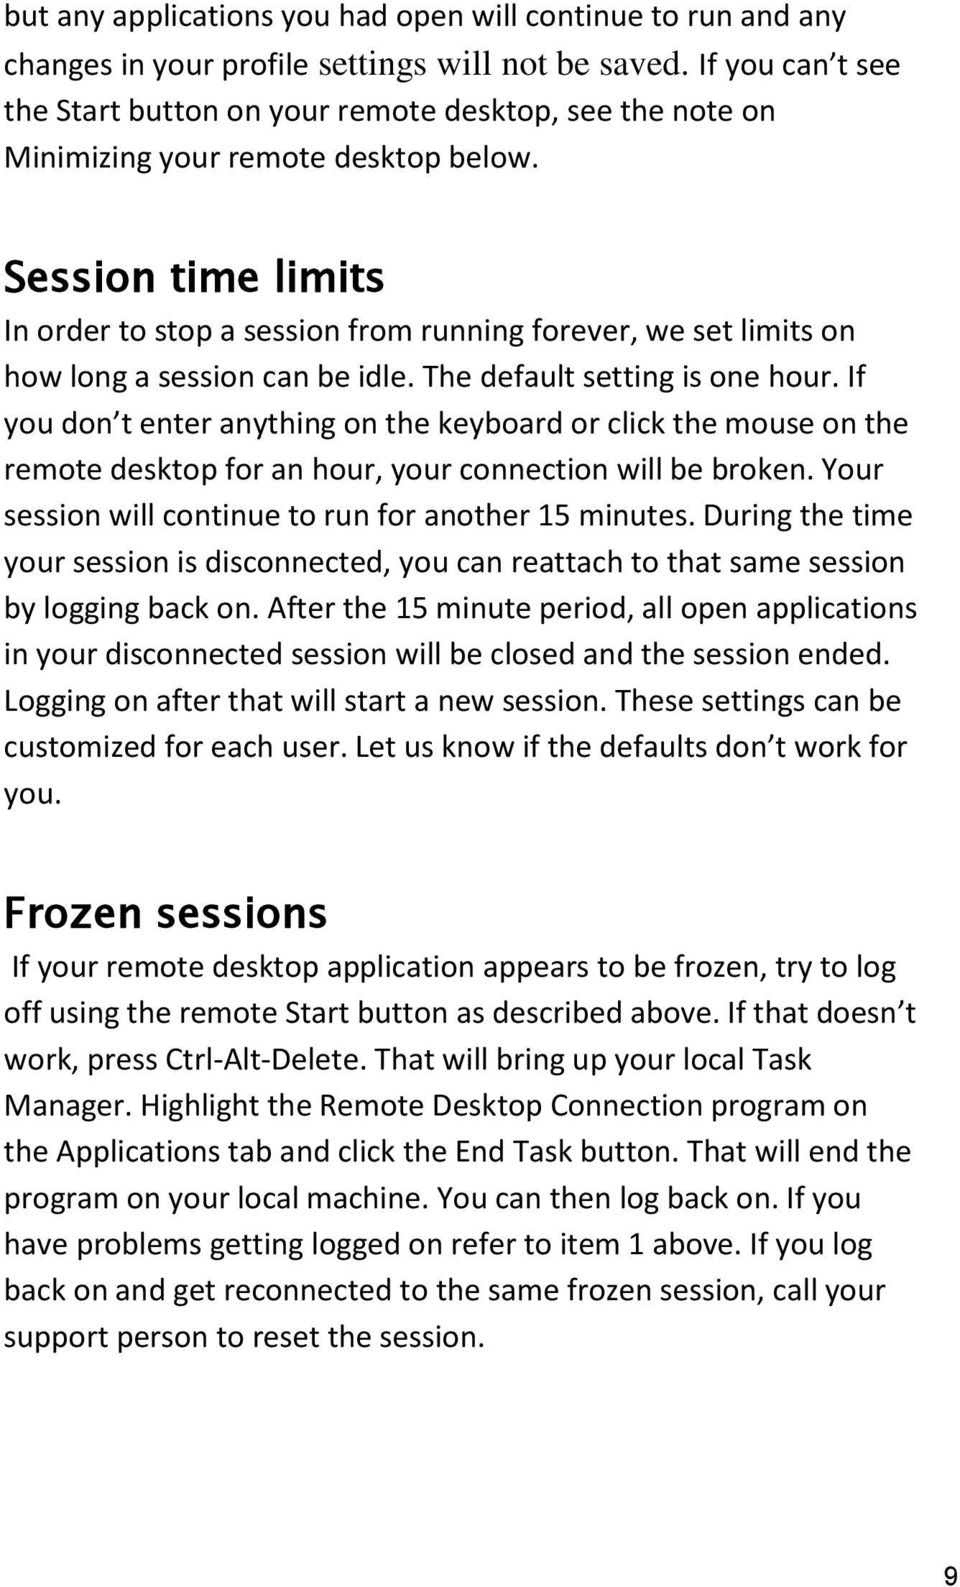 Session time limits In order to stop a session from running forever, we set limits on how long a session can be idle. The default setting is one hour.